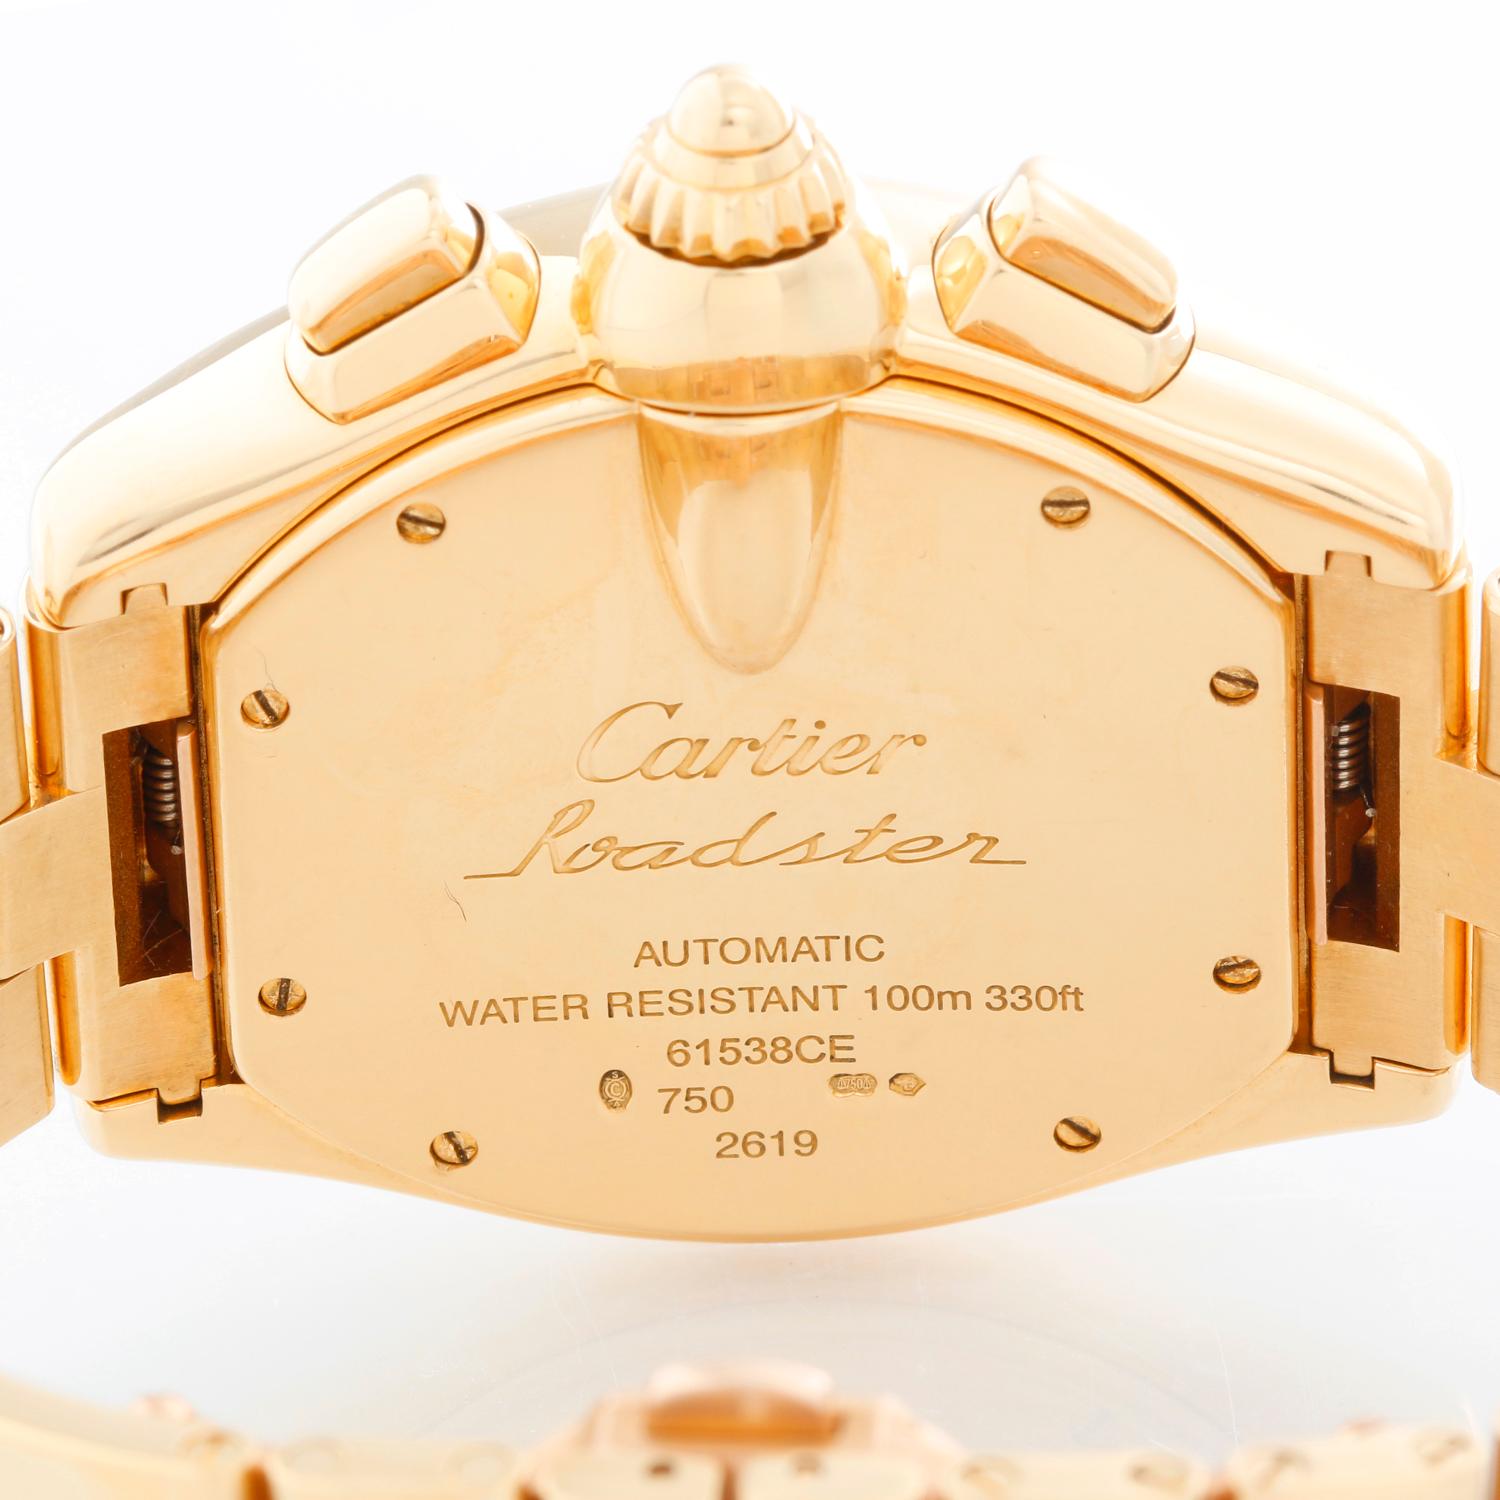 Cartier Roadster Chronograph 18k Yellow Gold Men's Watch W62021Y2 - Automatic winding; chronograph with date. 18k yellow gold case (43 mm x 47mm). Champagne  dial with black Roman numerals. Cartier 18k yellow gold bracelet; will fit a 7 1/2